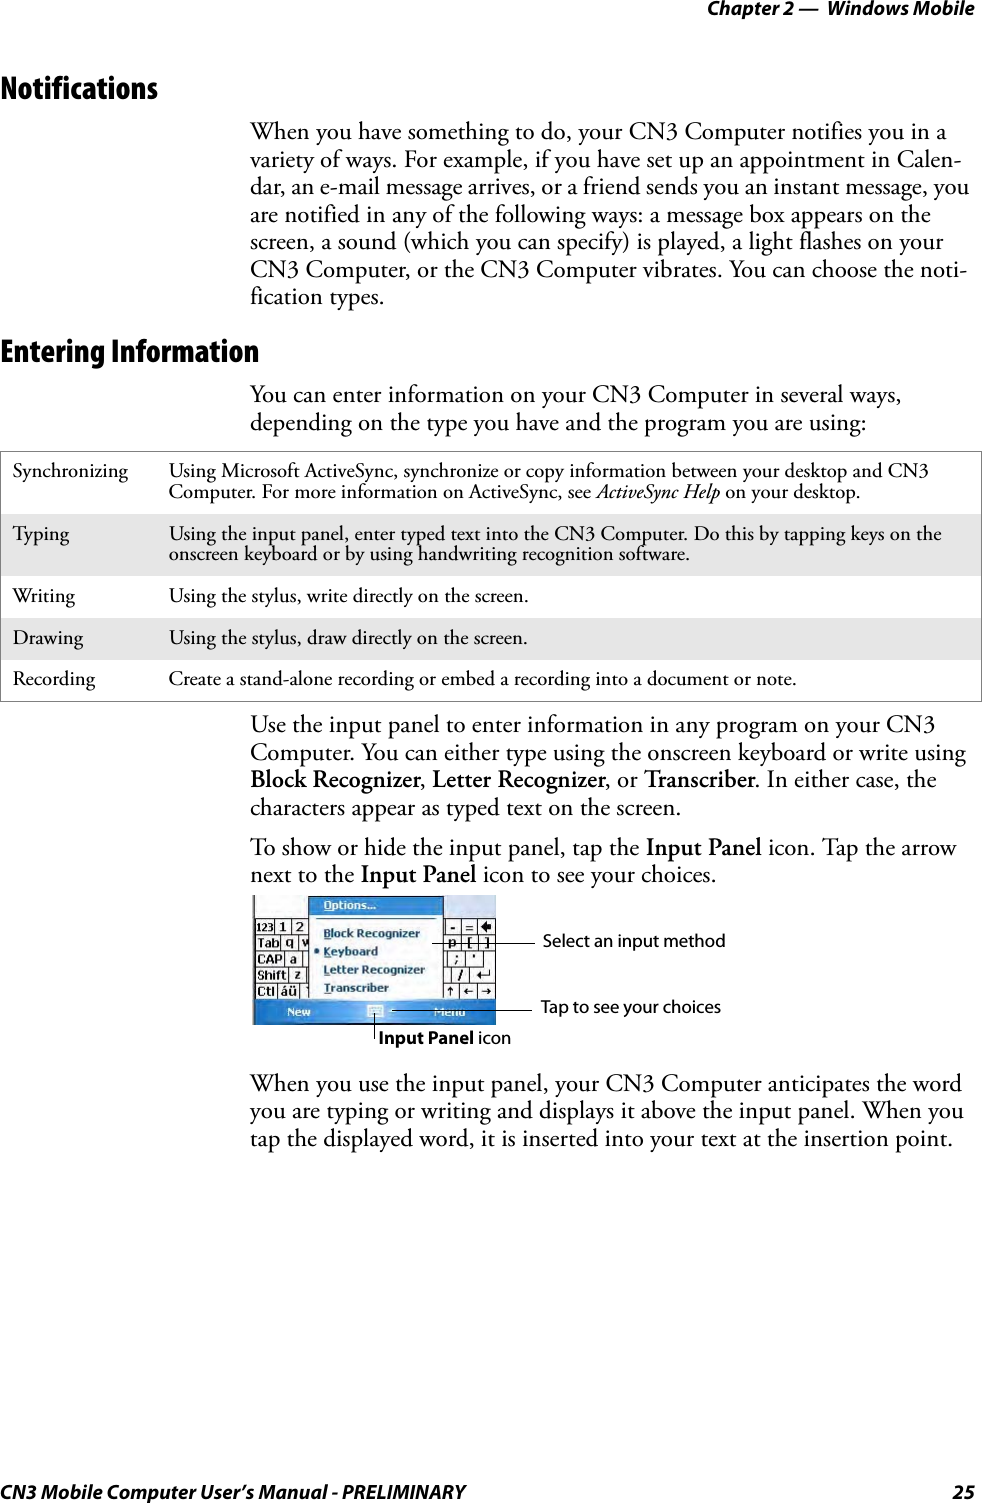 Chapter 2 —  Windows MobileCN3 Mobile Computer User’s Manual - PRELIMINARY 25NotificationsWhen you have something to do, your CN3 Computer notifies you in a variety of ways. For example, if you have set up an appointment in Calen-dar, an e-mail message arrives, or a friend sends you an instant message, you are notified in any of the following ways: a message box appears on the screen, a sound (which you can specify) is played, a light flashes on your CN3 Computer, or the CN3 Computer vibrates. You can choose the noti-fication types.Entering InformationYou can enter information on your CN3 Computer in several ways, depending on the type you have and the program you are using:Use the input panel to enter information in any program on your CN3 Computer. You can either type using the onscreen keyboard or write using Block Recognizer, Letter Recognizer, or Transcriber. In either case, the characters appear as typed text on the screen.To show or hide the input panel, tap the Input Panel icon. Tap the arrow next to the Input Panel icon to see your choices.When you use the input panel, your CN3 Computer anticipates the word you are typing or writing and displays it above the input panel. When you tap the displayed word, it is inserted into your text at the insertion point. Synchronizing Using Microsoft ActiveSync, synchronize or copy information between your desktop and CN3 Computer. For more information on ActiveSync, see ActiveSync Help on your desktop.Typin g Using the input panel, enter typed text into the CN3 Computer. Do this by tapping keys on the onscreen keyboard or by using handwriting recognition software.Writing Using the stylus, write directly on the screen.Drawing Using the stylus, draw directly on the screen.Recording Create a stand-alone recording or embed a recording into a document or note.Select an input methodTap to see your choicesInput Panel icon